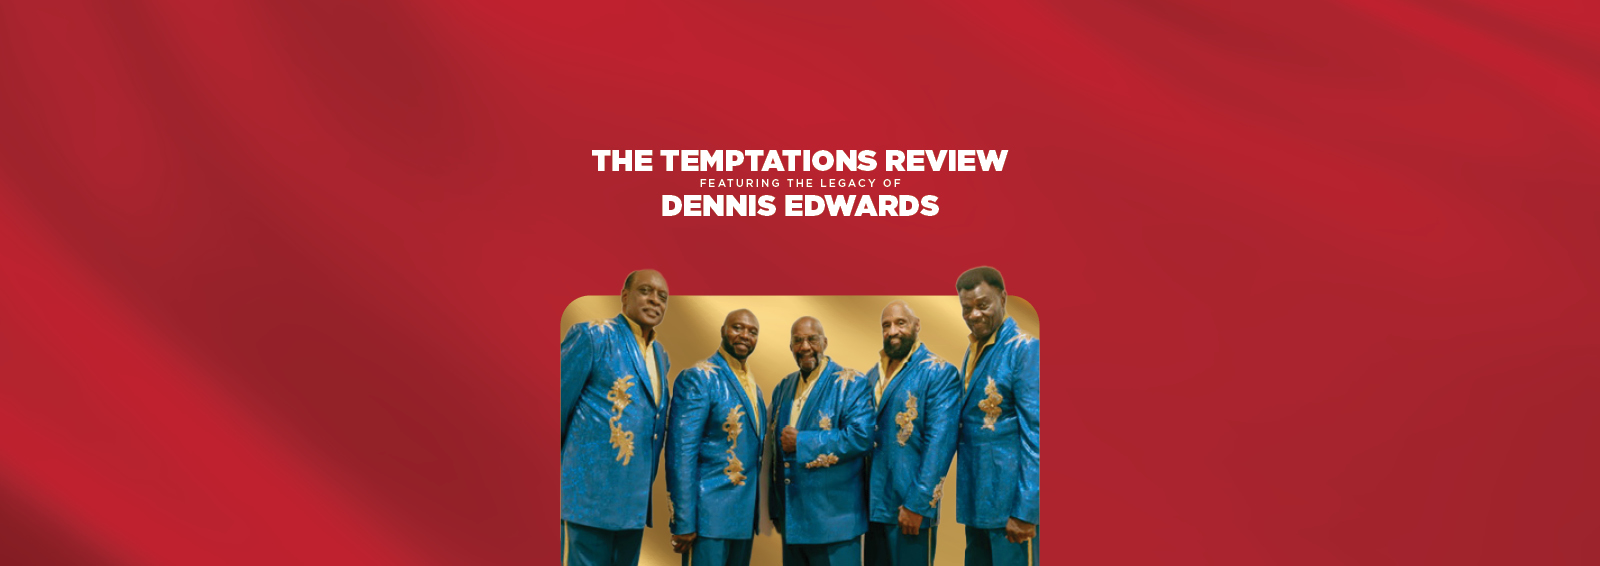 THE TEMPTATIONS REVIEW featuring the Legacy of DENNIS EDWARDS